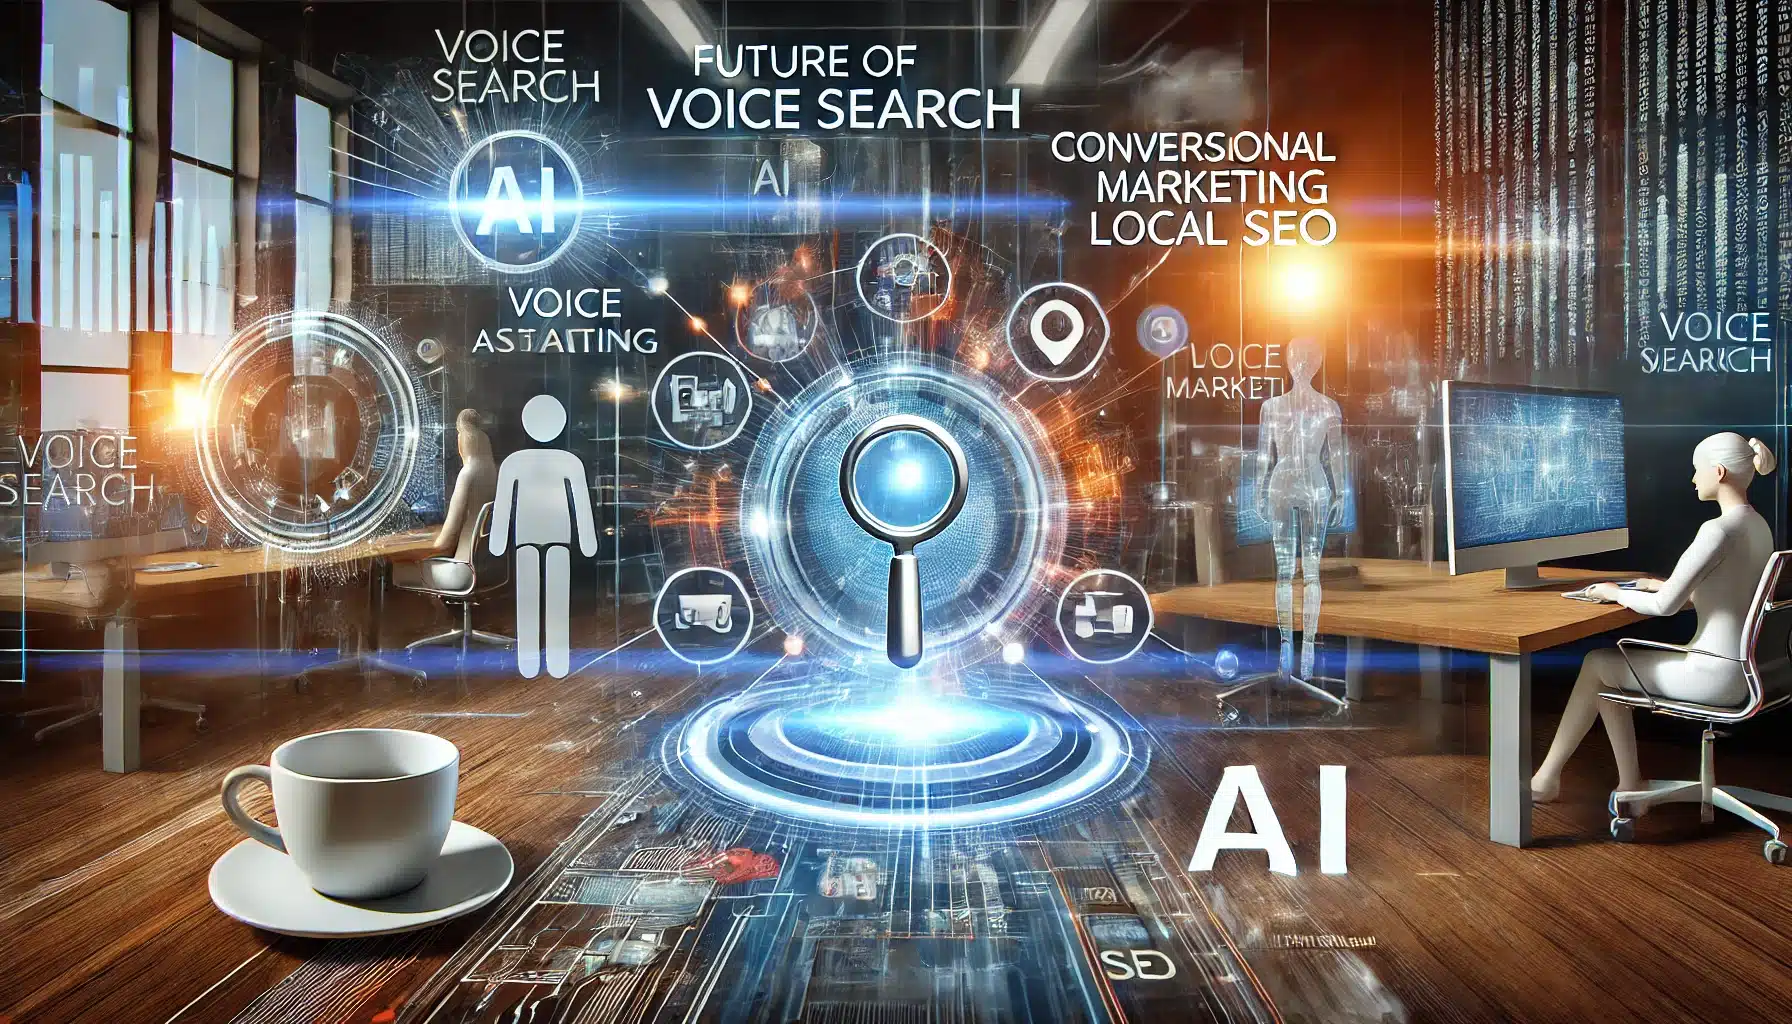 A modern and dynamic scene depicting the future of voice search and its impact on AI marketing.